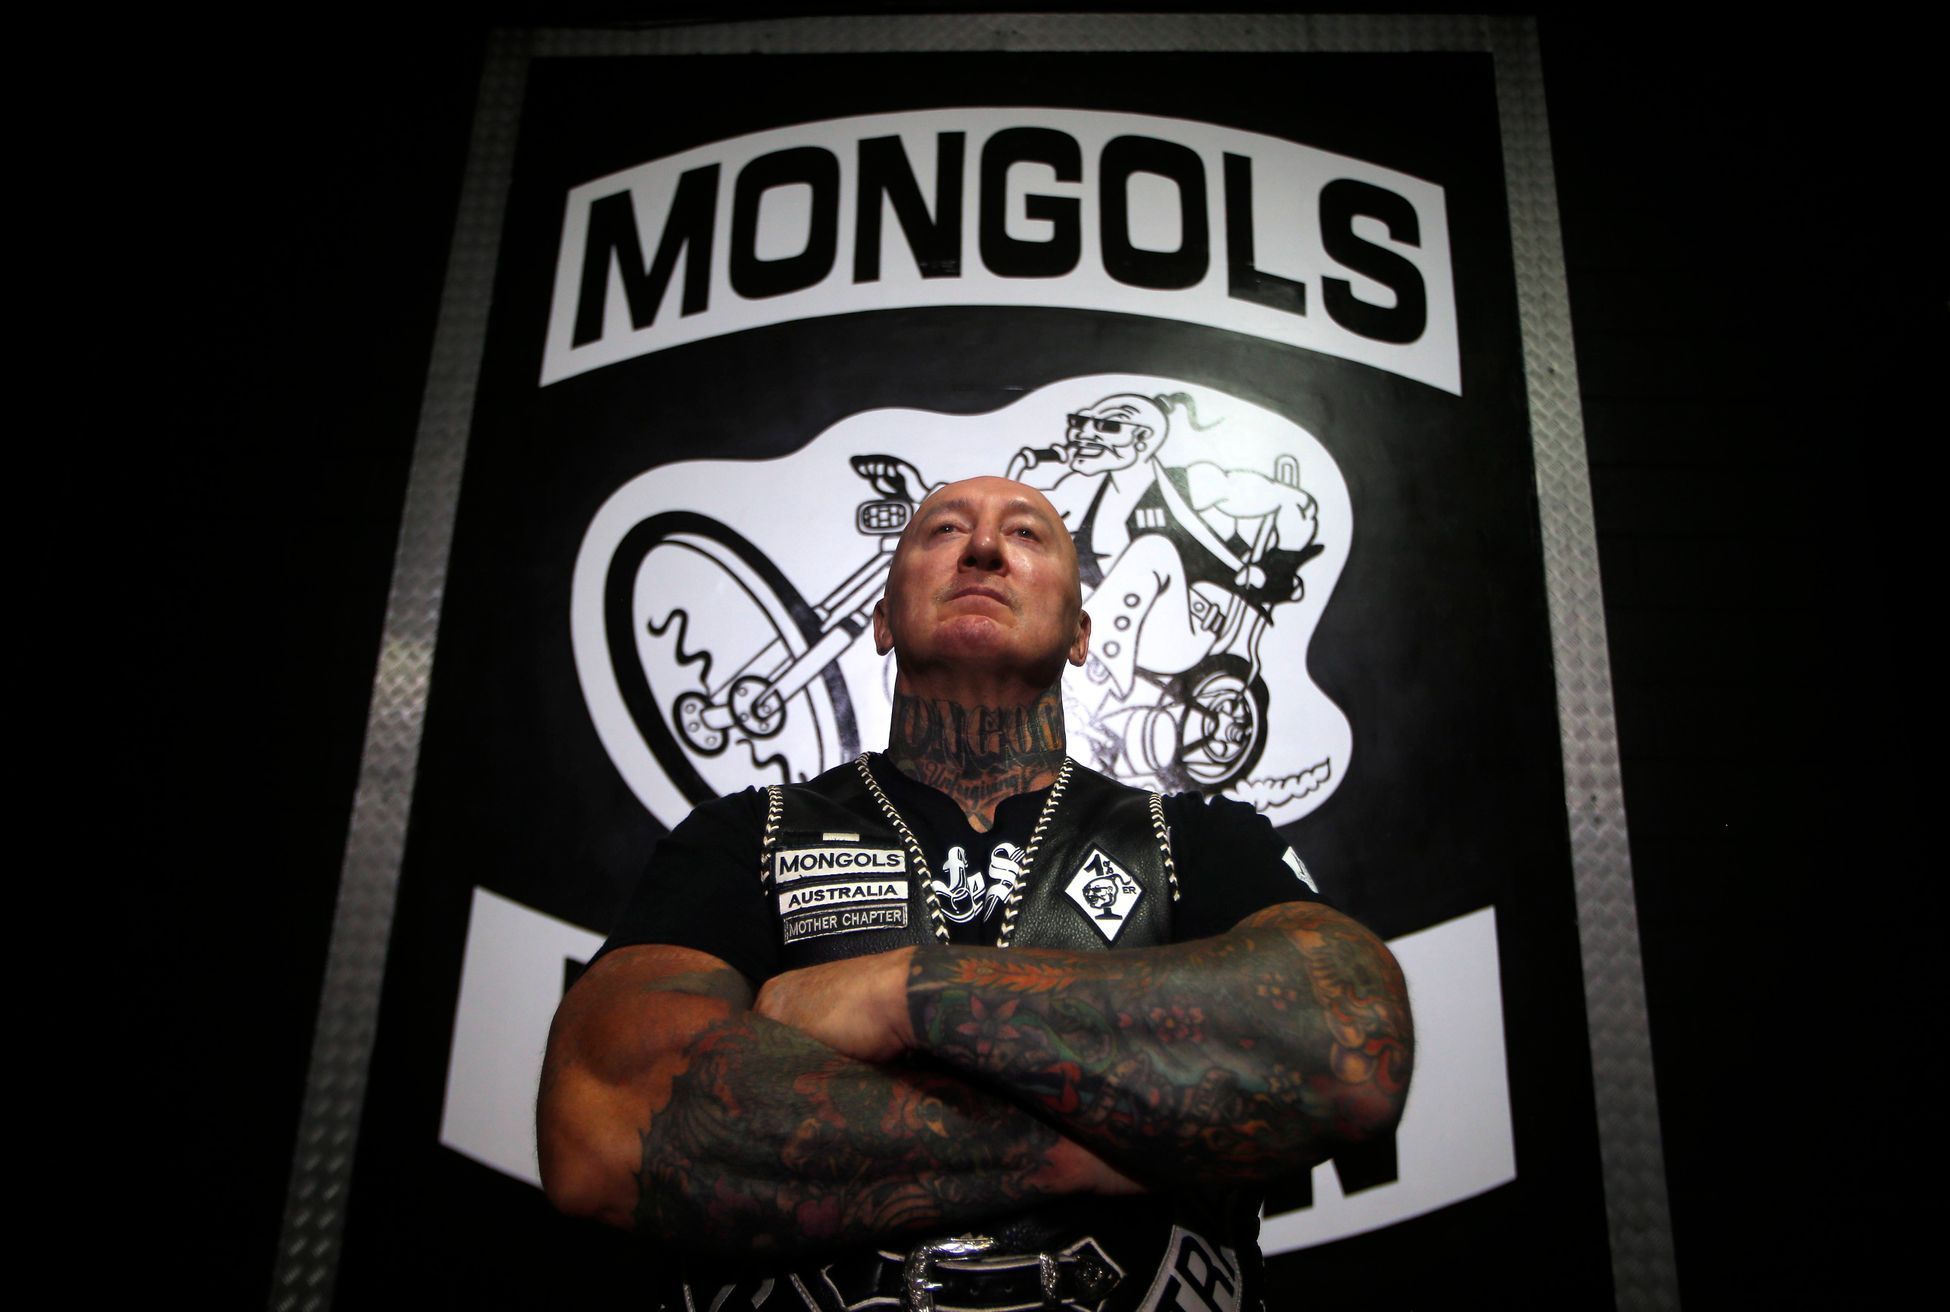 Mark "Ferret" Moroney, national president of the Mongols Motorcycle Club